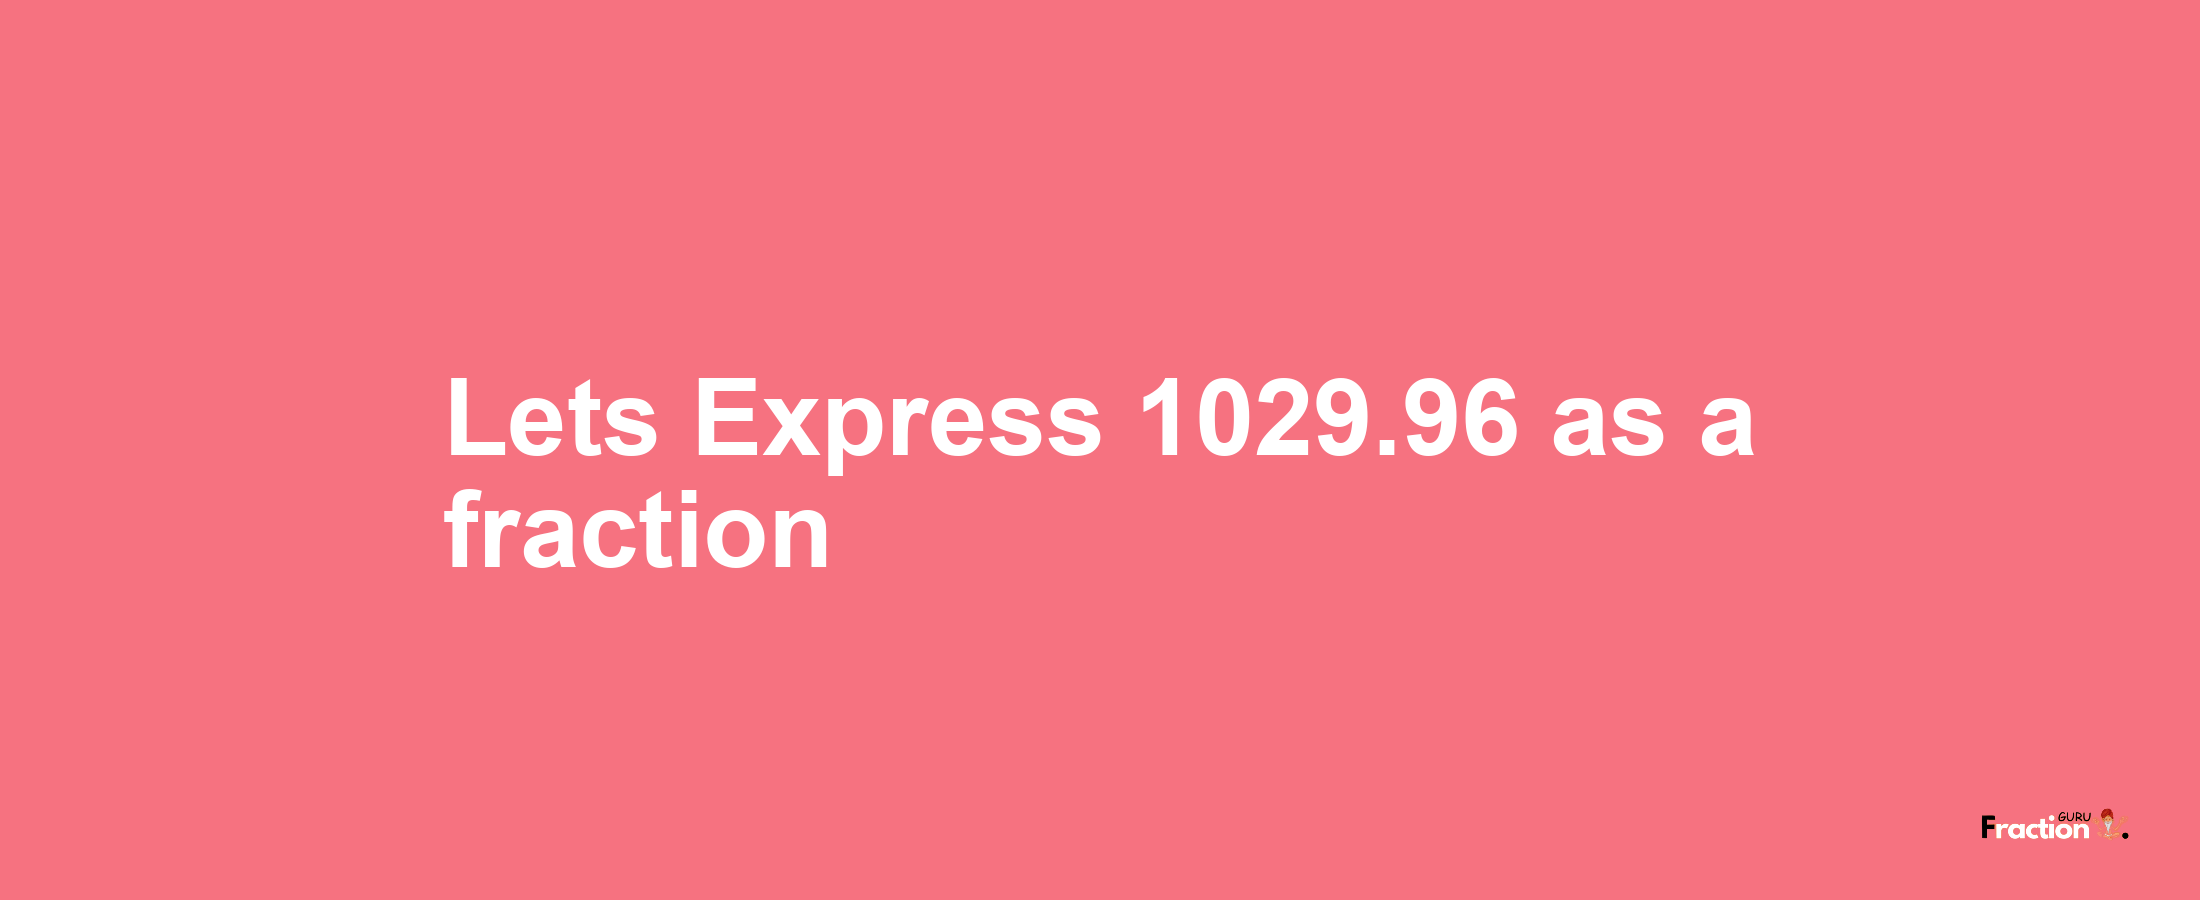 Lets Express 1029.96 as afraction